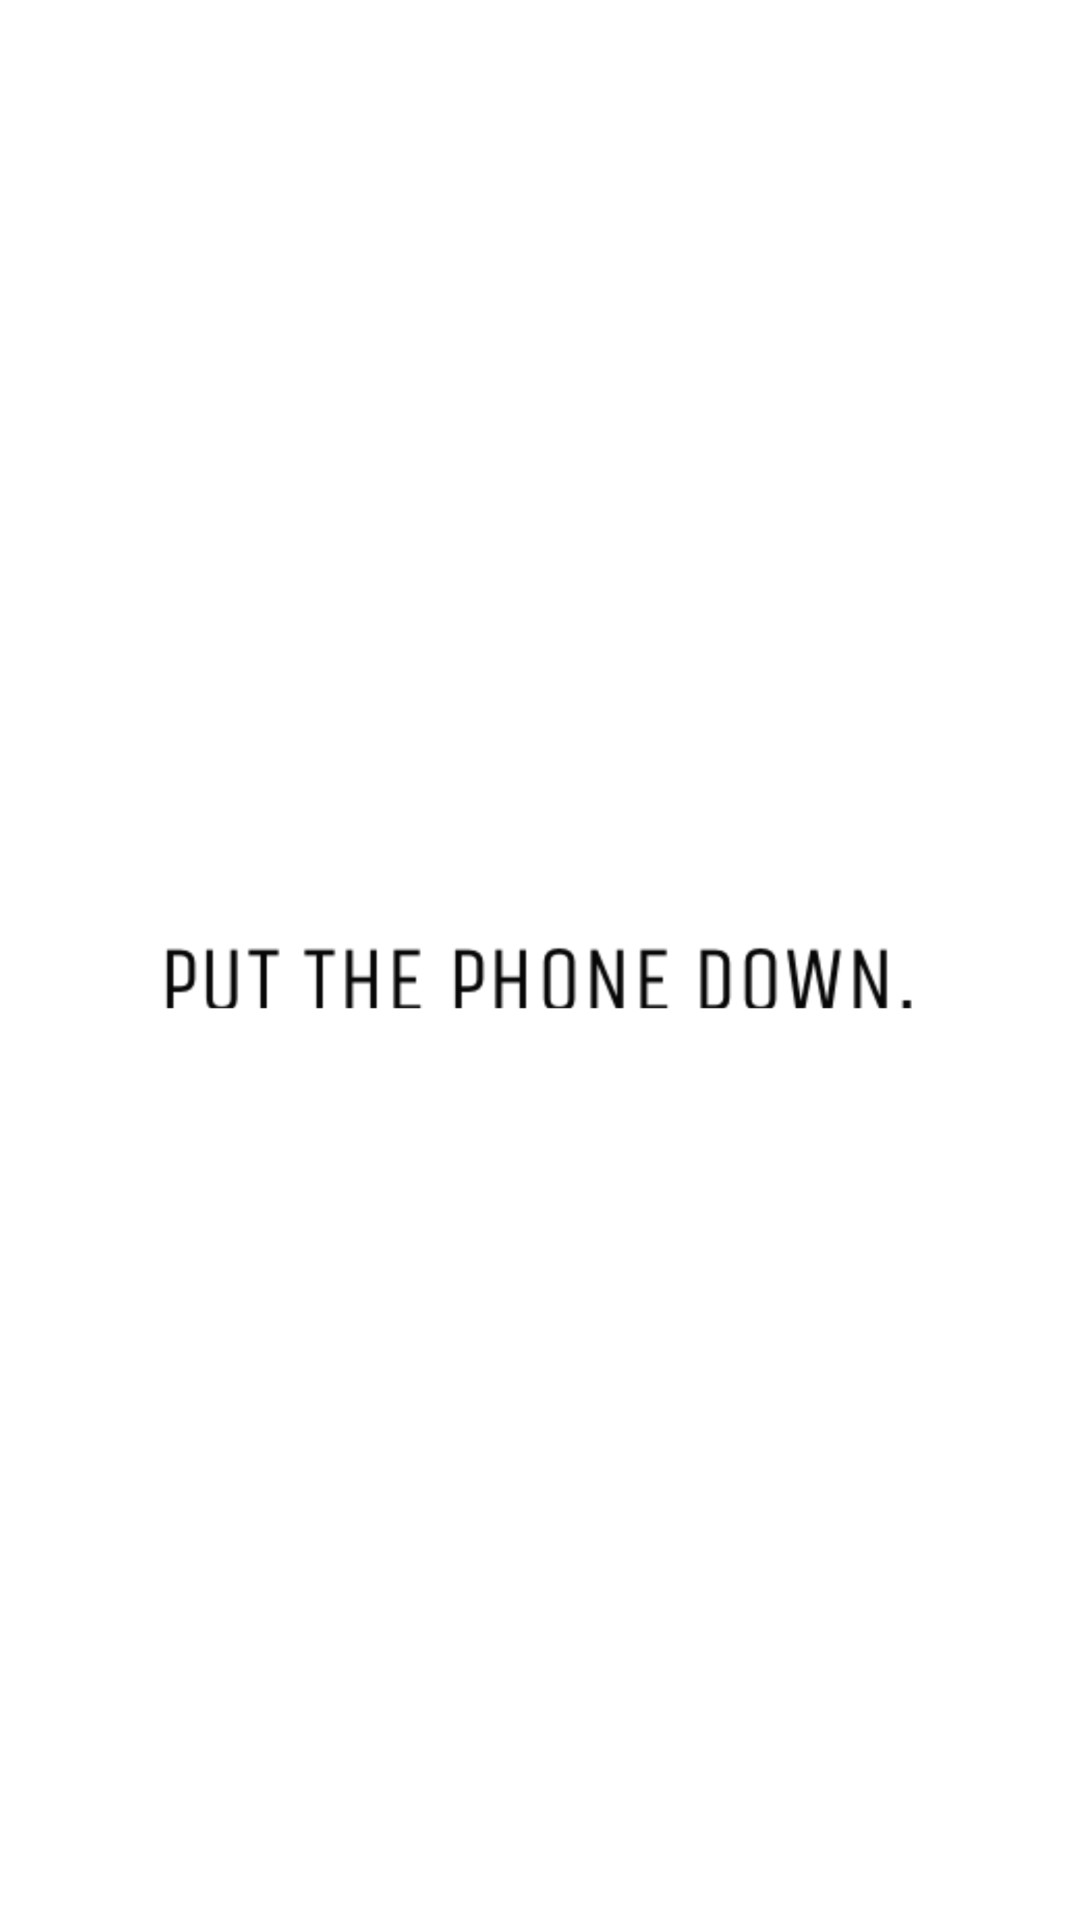 1084x1927 free minimal phone wallpaper - 'put the phone down!' By Miss Caly